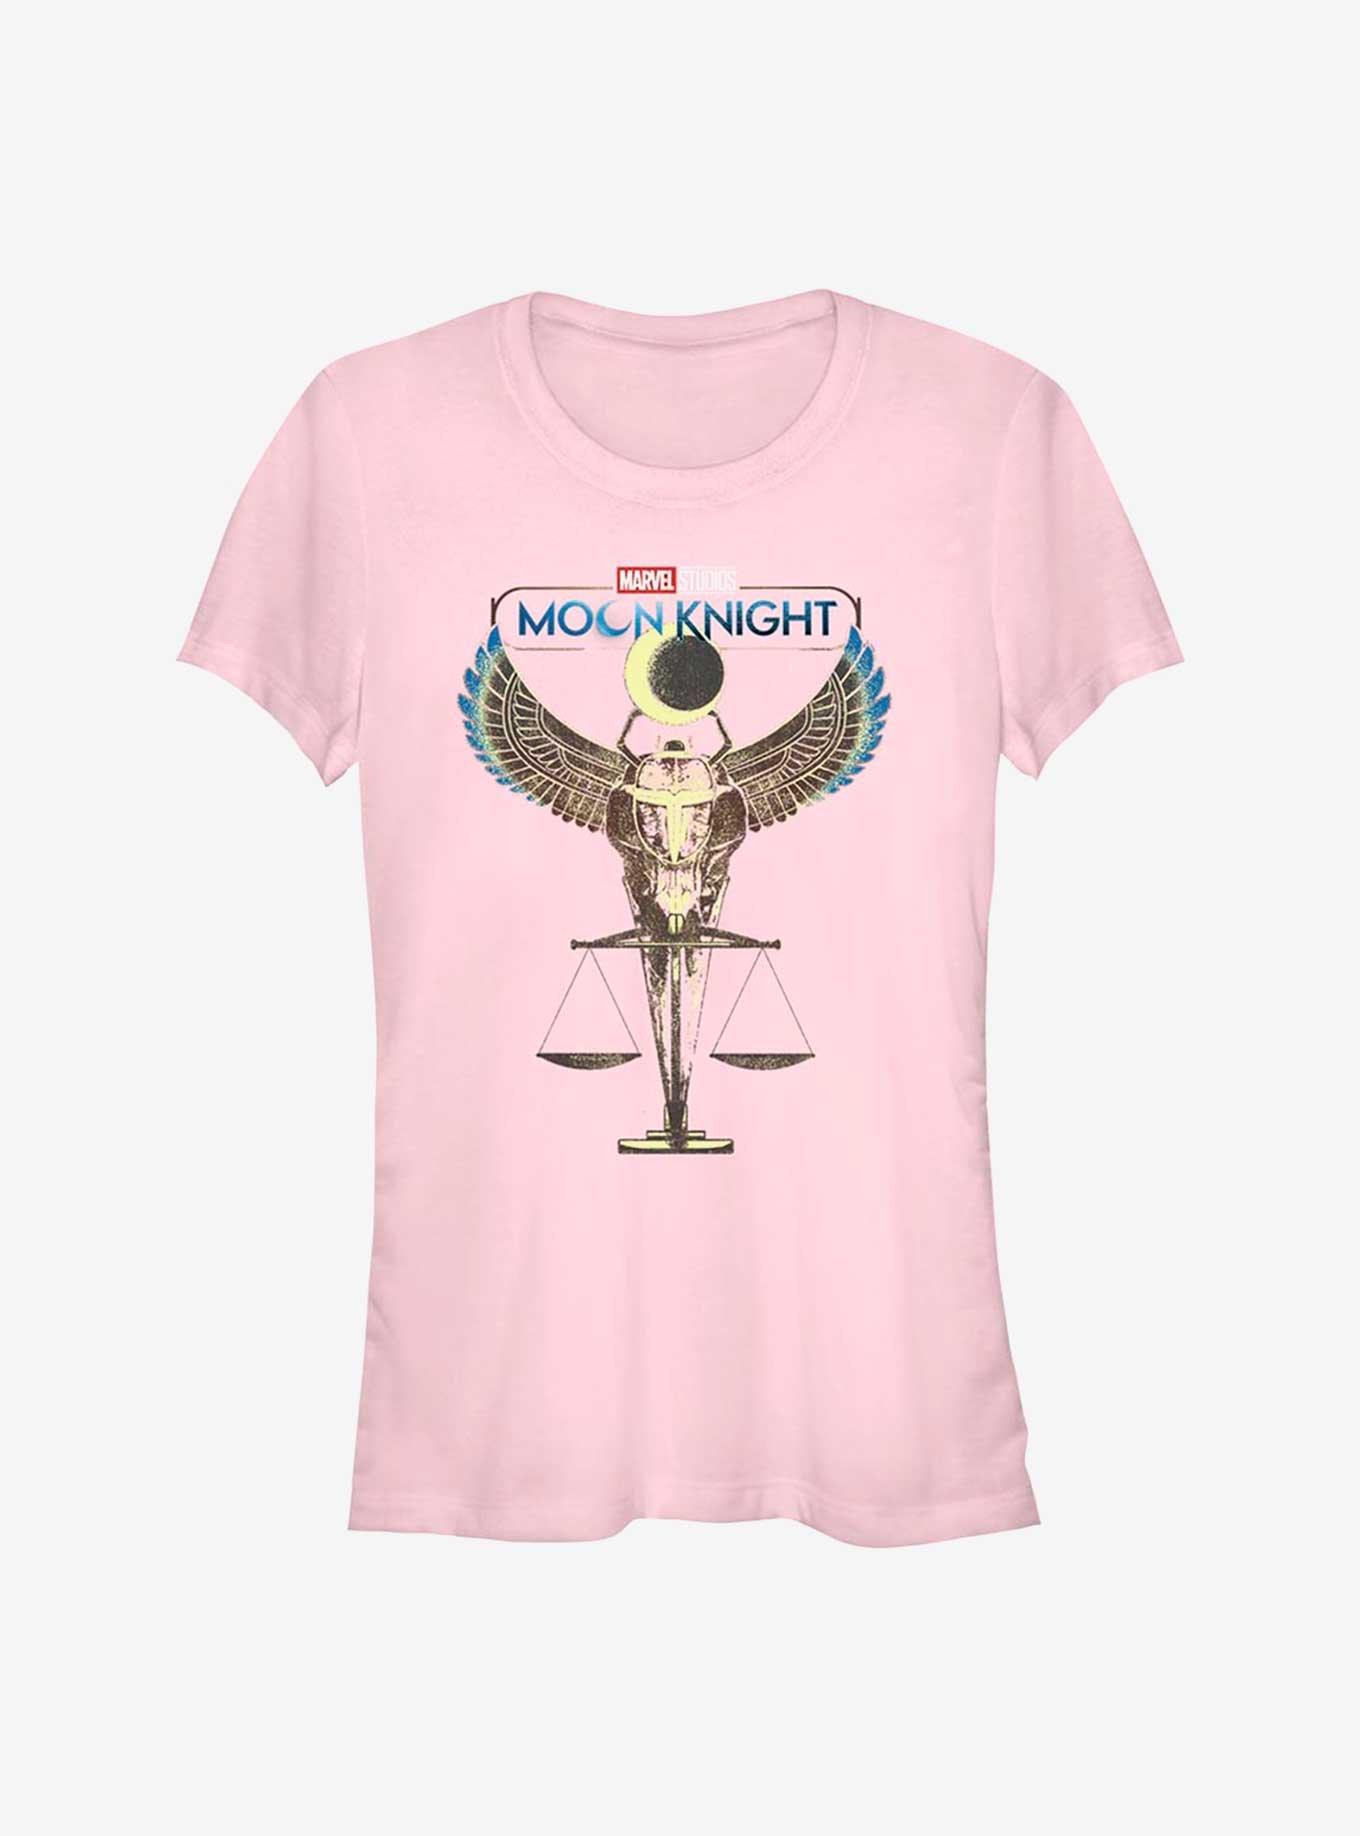 Marvel Moon Knight Scales of Justice Girls T-Shirt, LIGHT PINK, hi-res